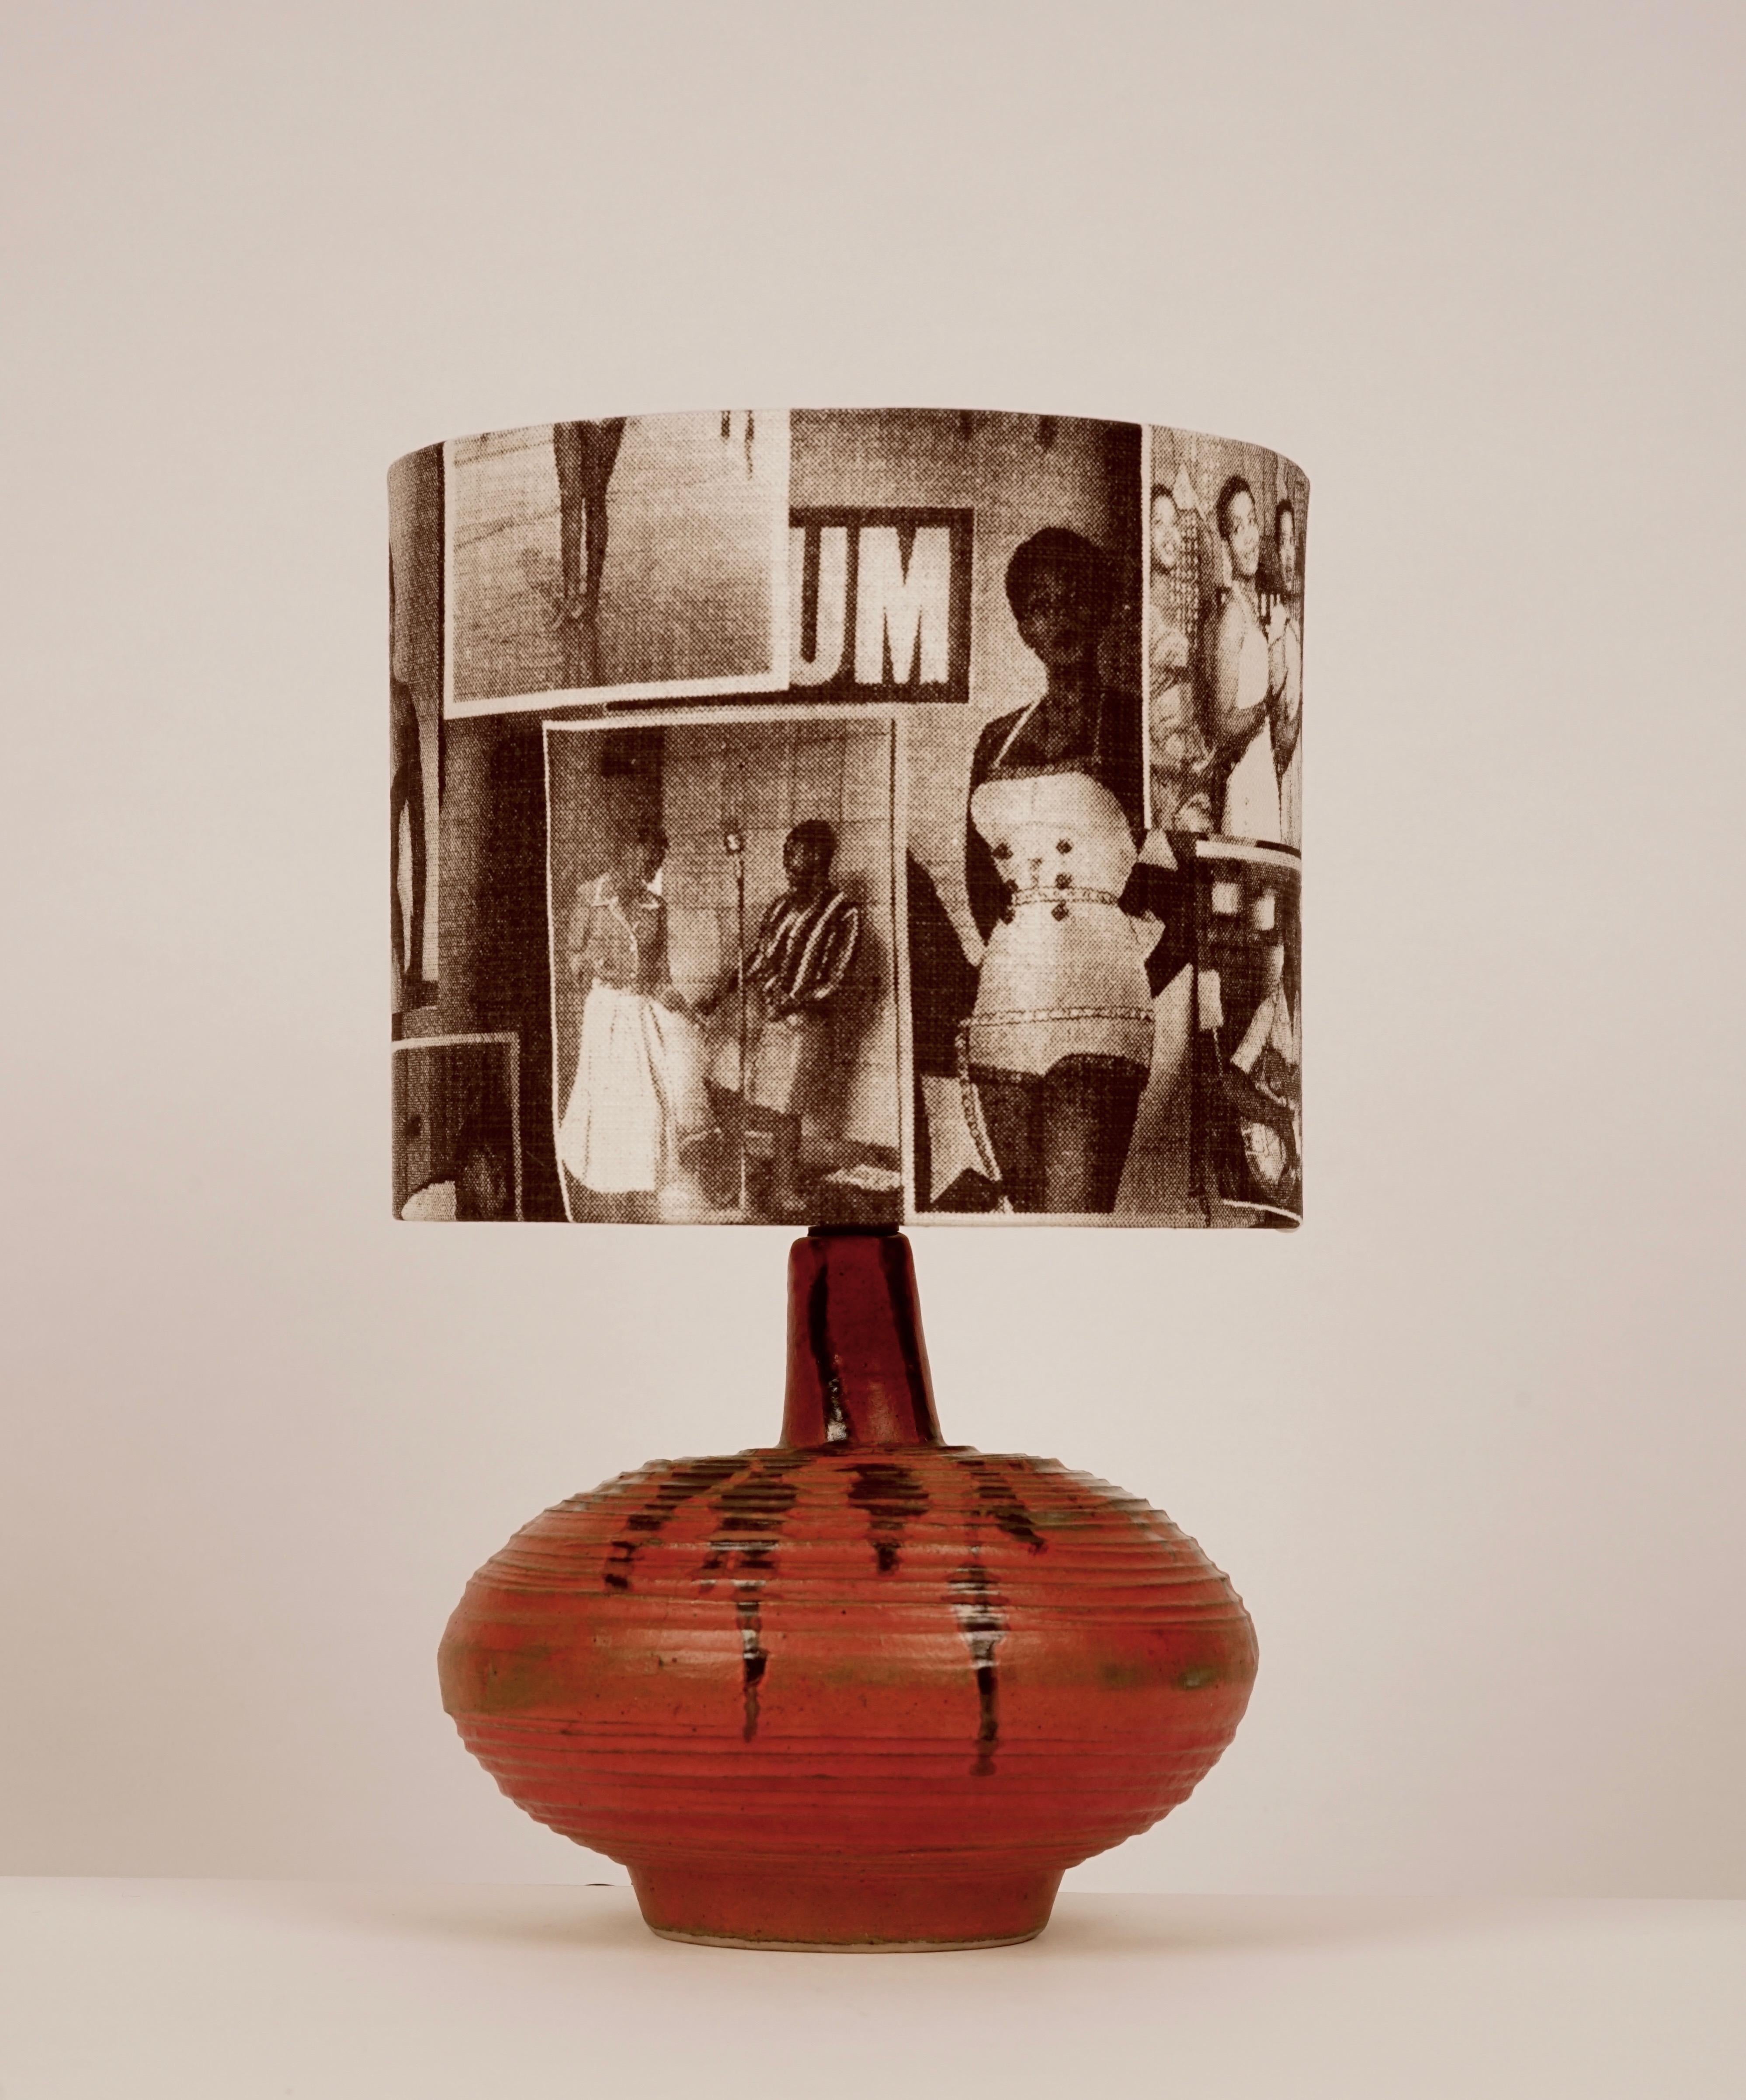 The lamp base comes from the Hungarian studio ceramic era, 1950s. The hand formed ceramic is glassed orange with dark accents. 
The lampshade has been covered in a cotton fabric with motifs from the Drum magazine.